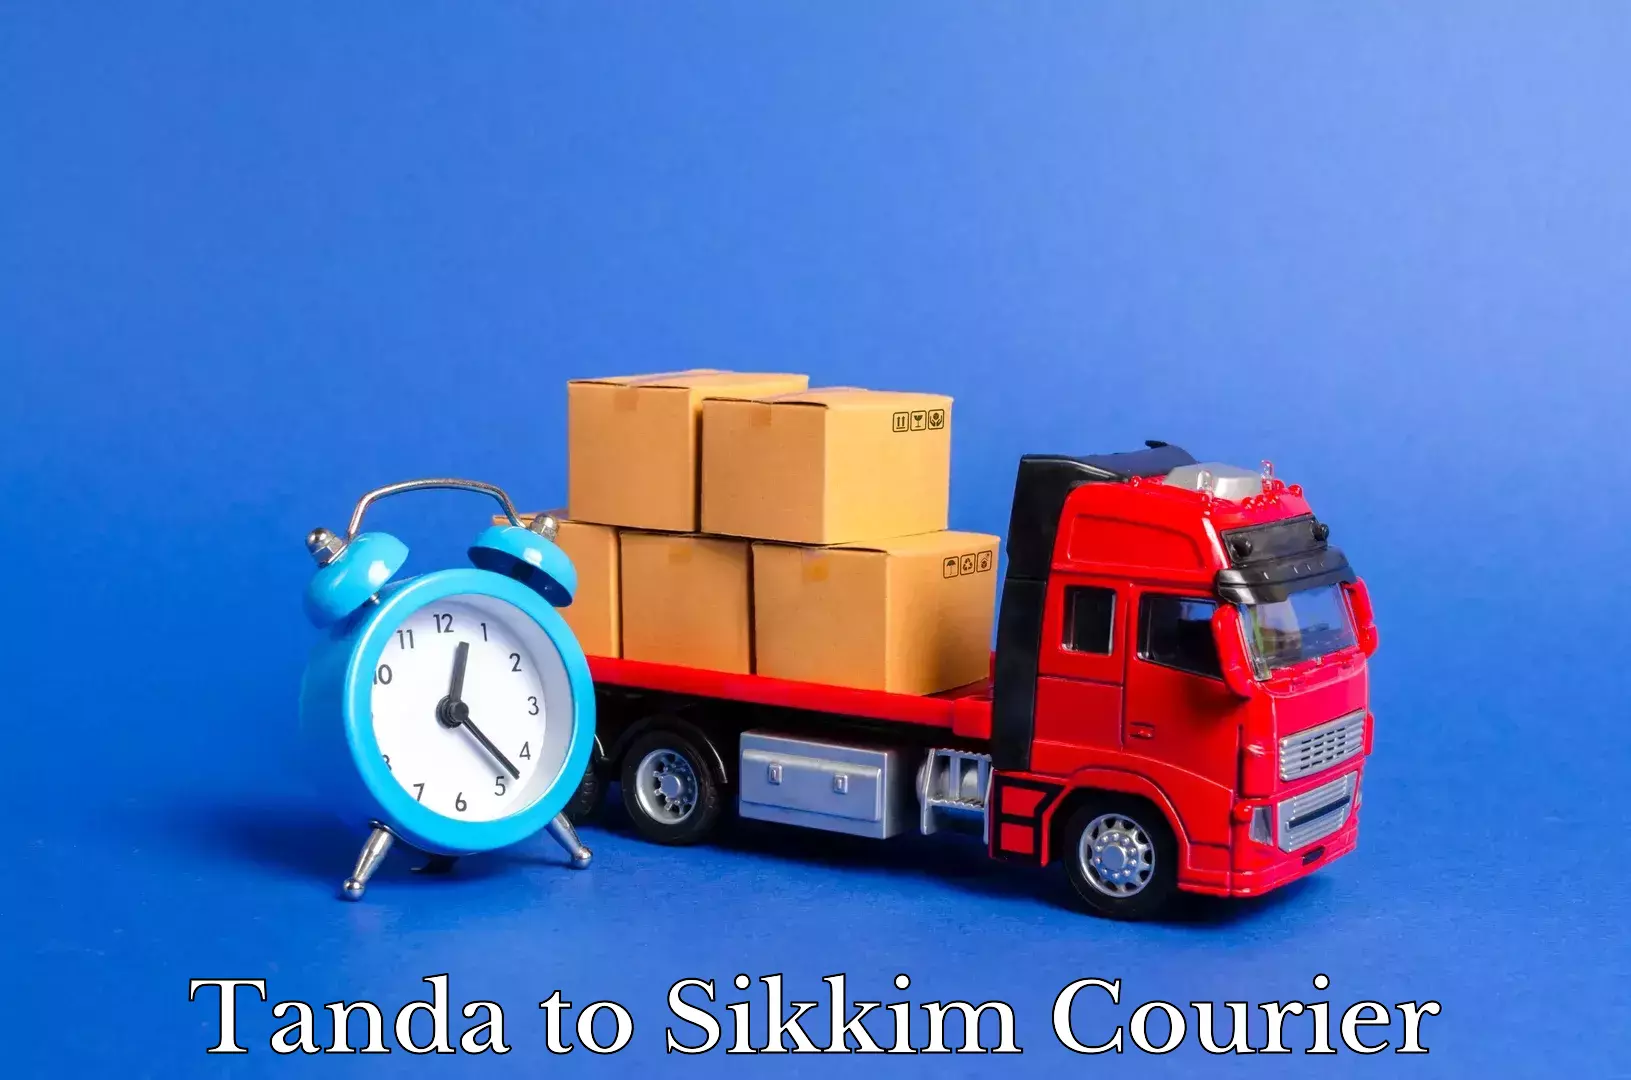 Hassle-free relocation in Tanda to North Sikkim